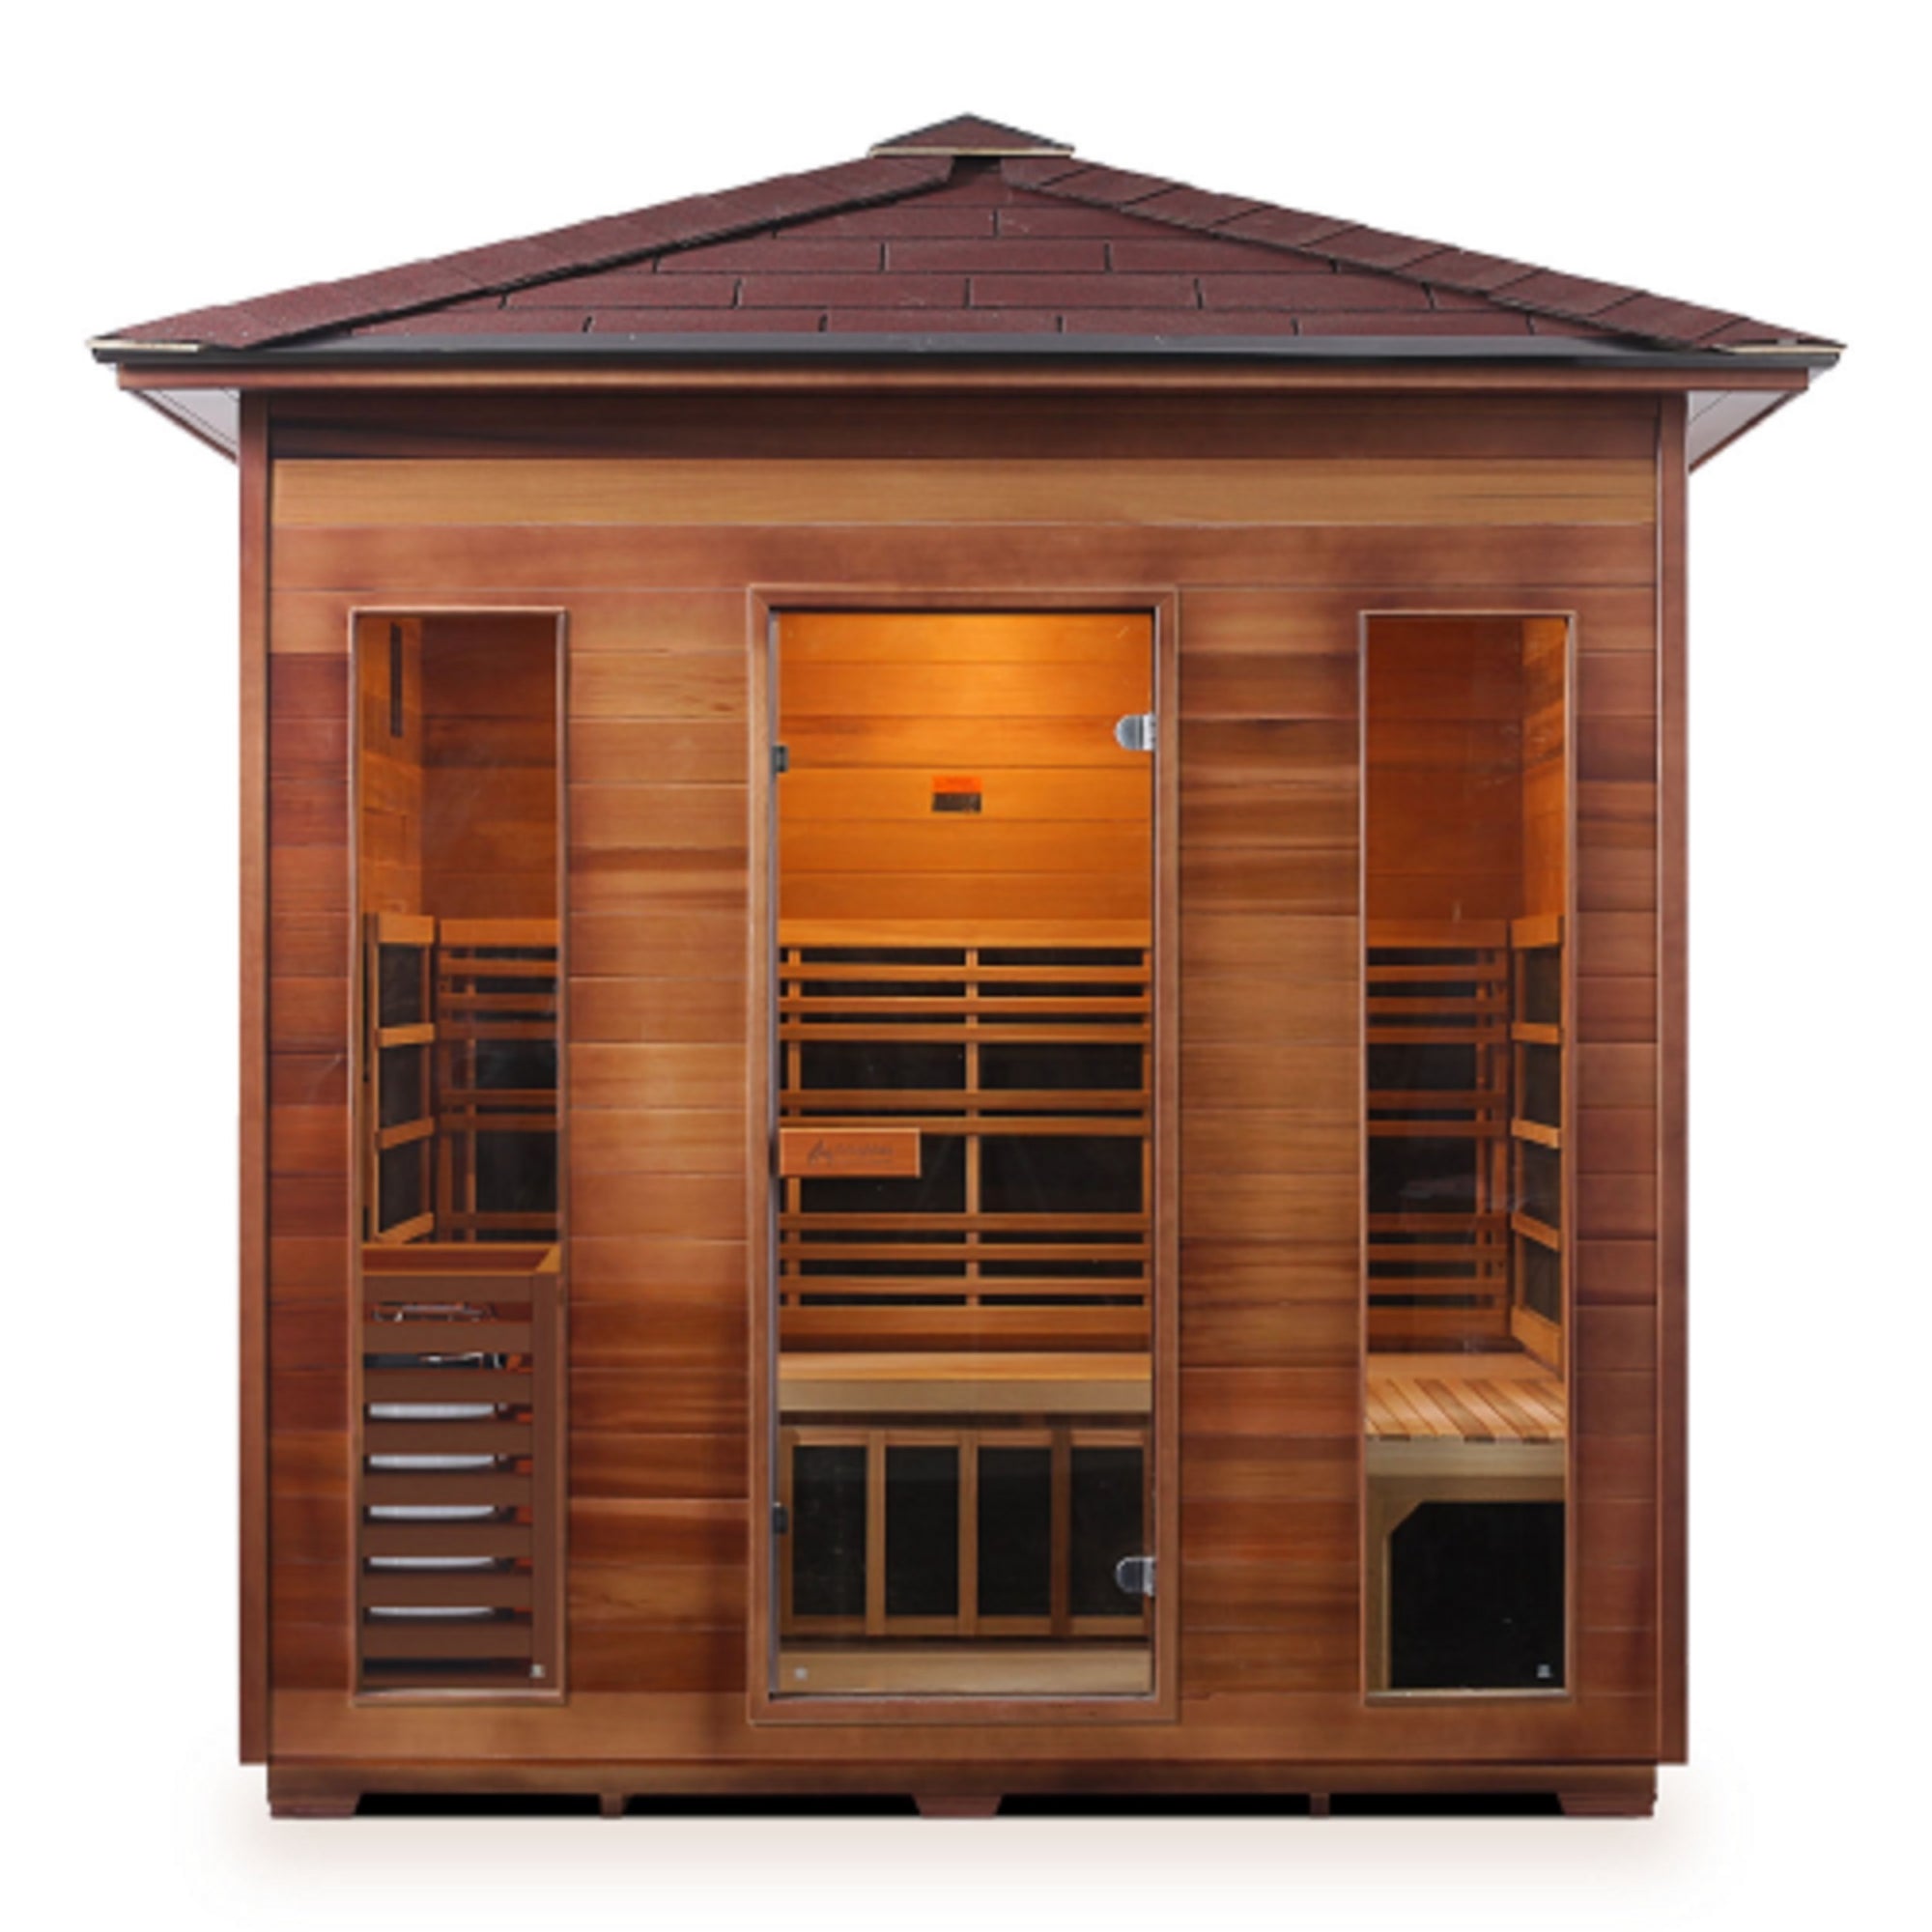 Enlighten sauna Infrared and Dry Traditional Hybrid Diamond 5 Person Outdoor Canadian Red Cedar Wood Outside And Inside Double Roof ( Flat Roof + peak roof) with glass door and windows front view